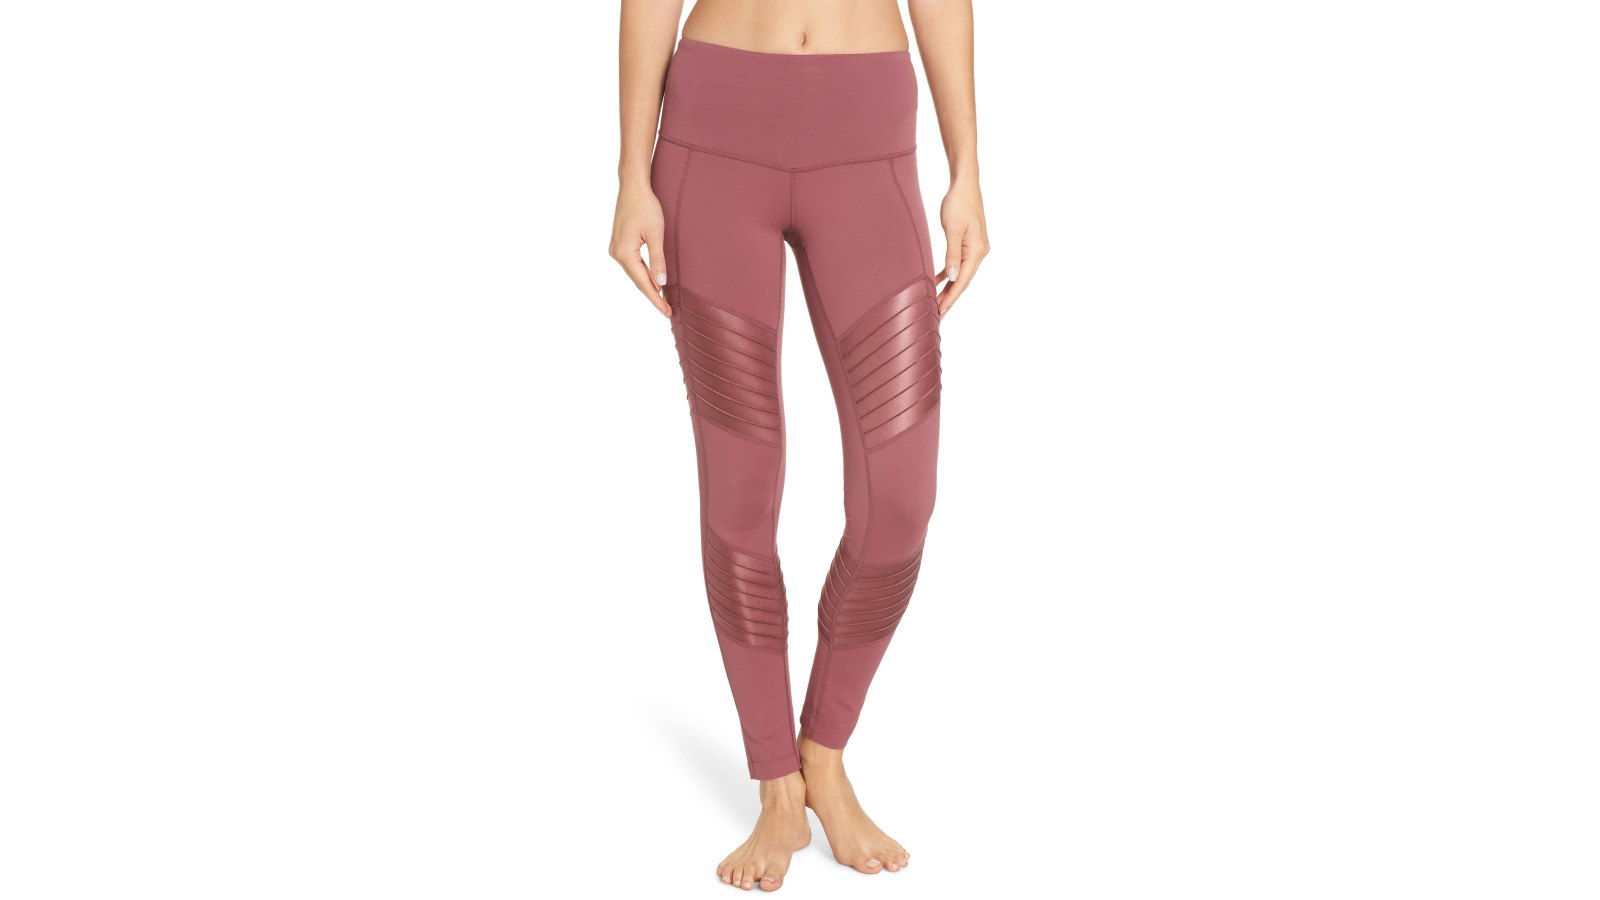 These Moto-Inspired Leggings Are Too Cute to Just Wear to the Gym